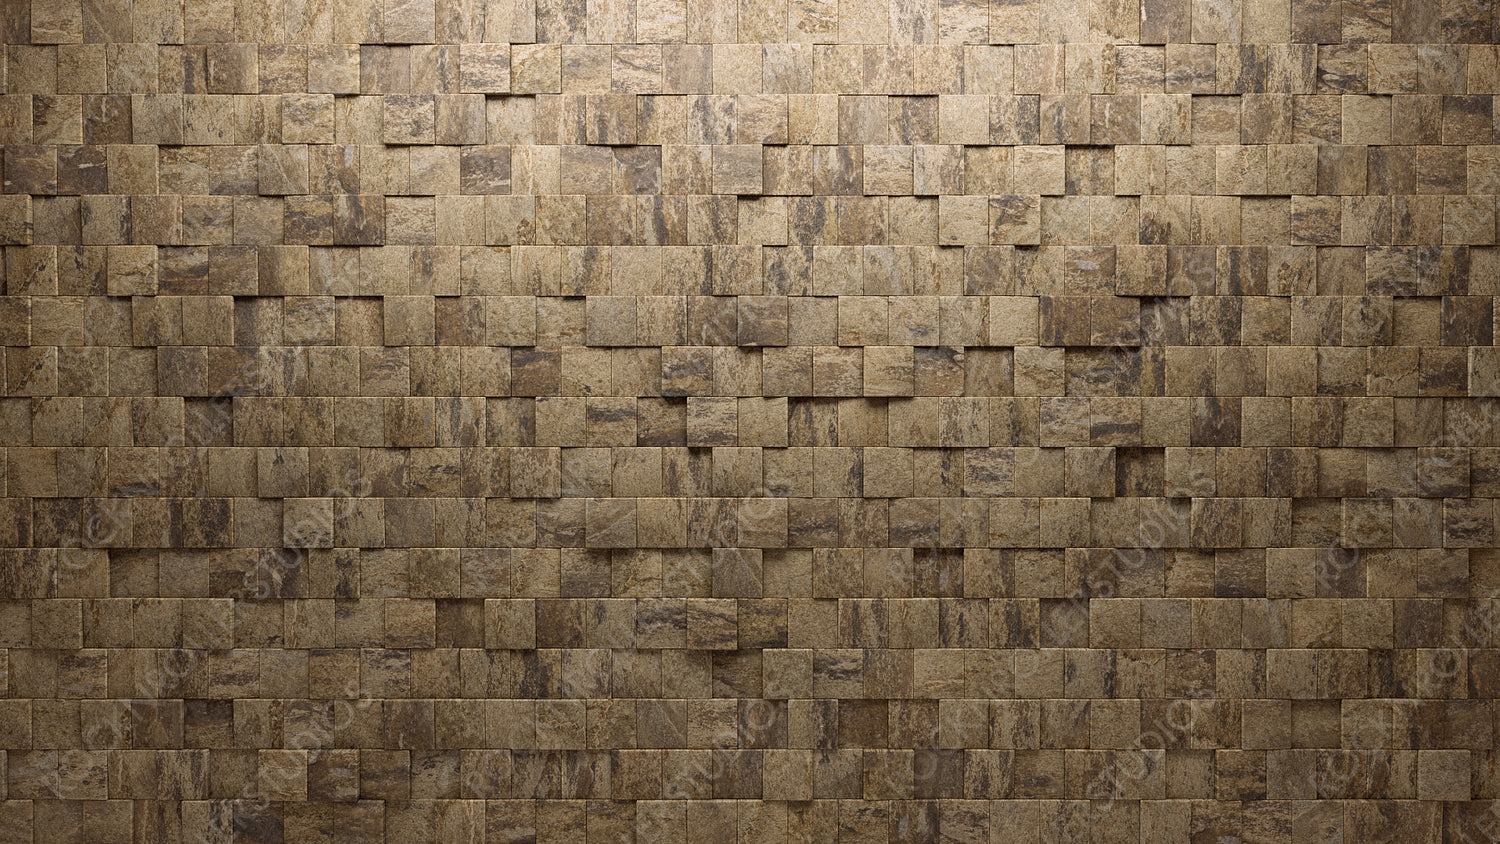 Semigloss Tiles arranged to create a Natural Stone wall. Textured, Square Background formed from 3D blocks. 3D Render